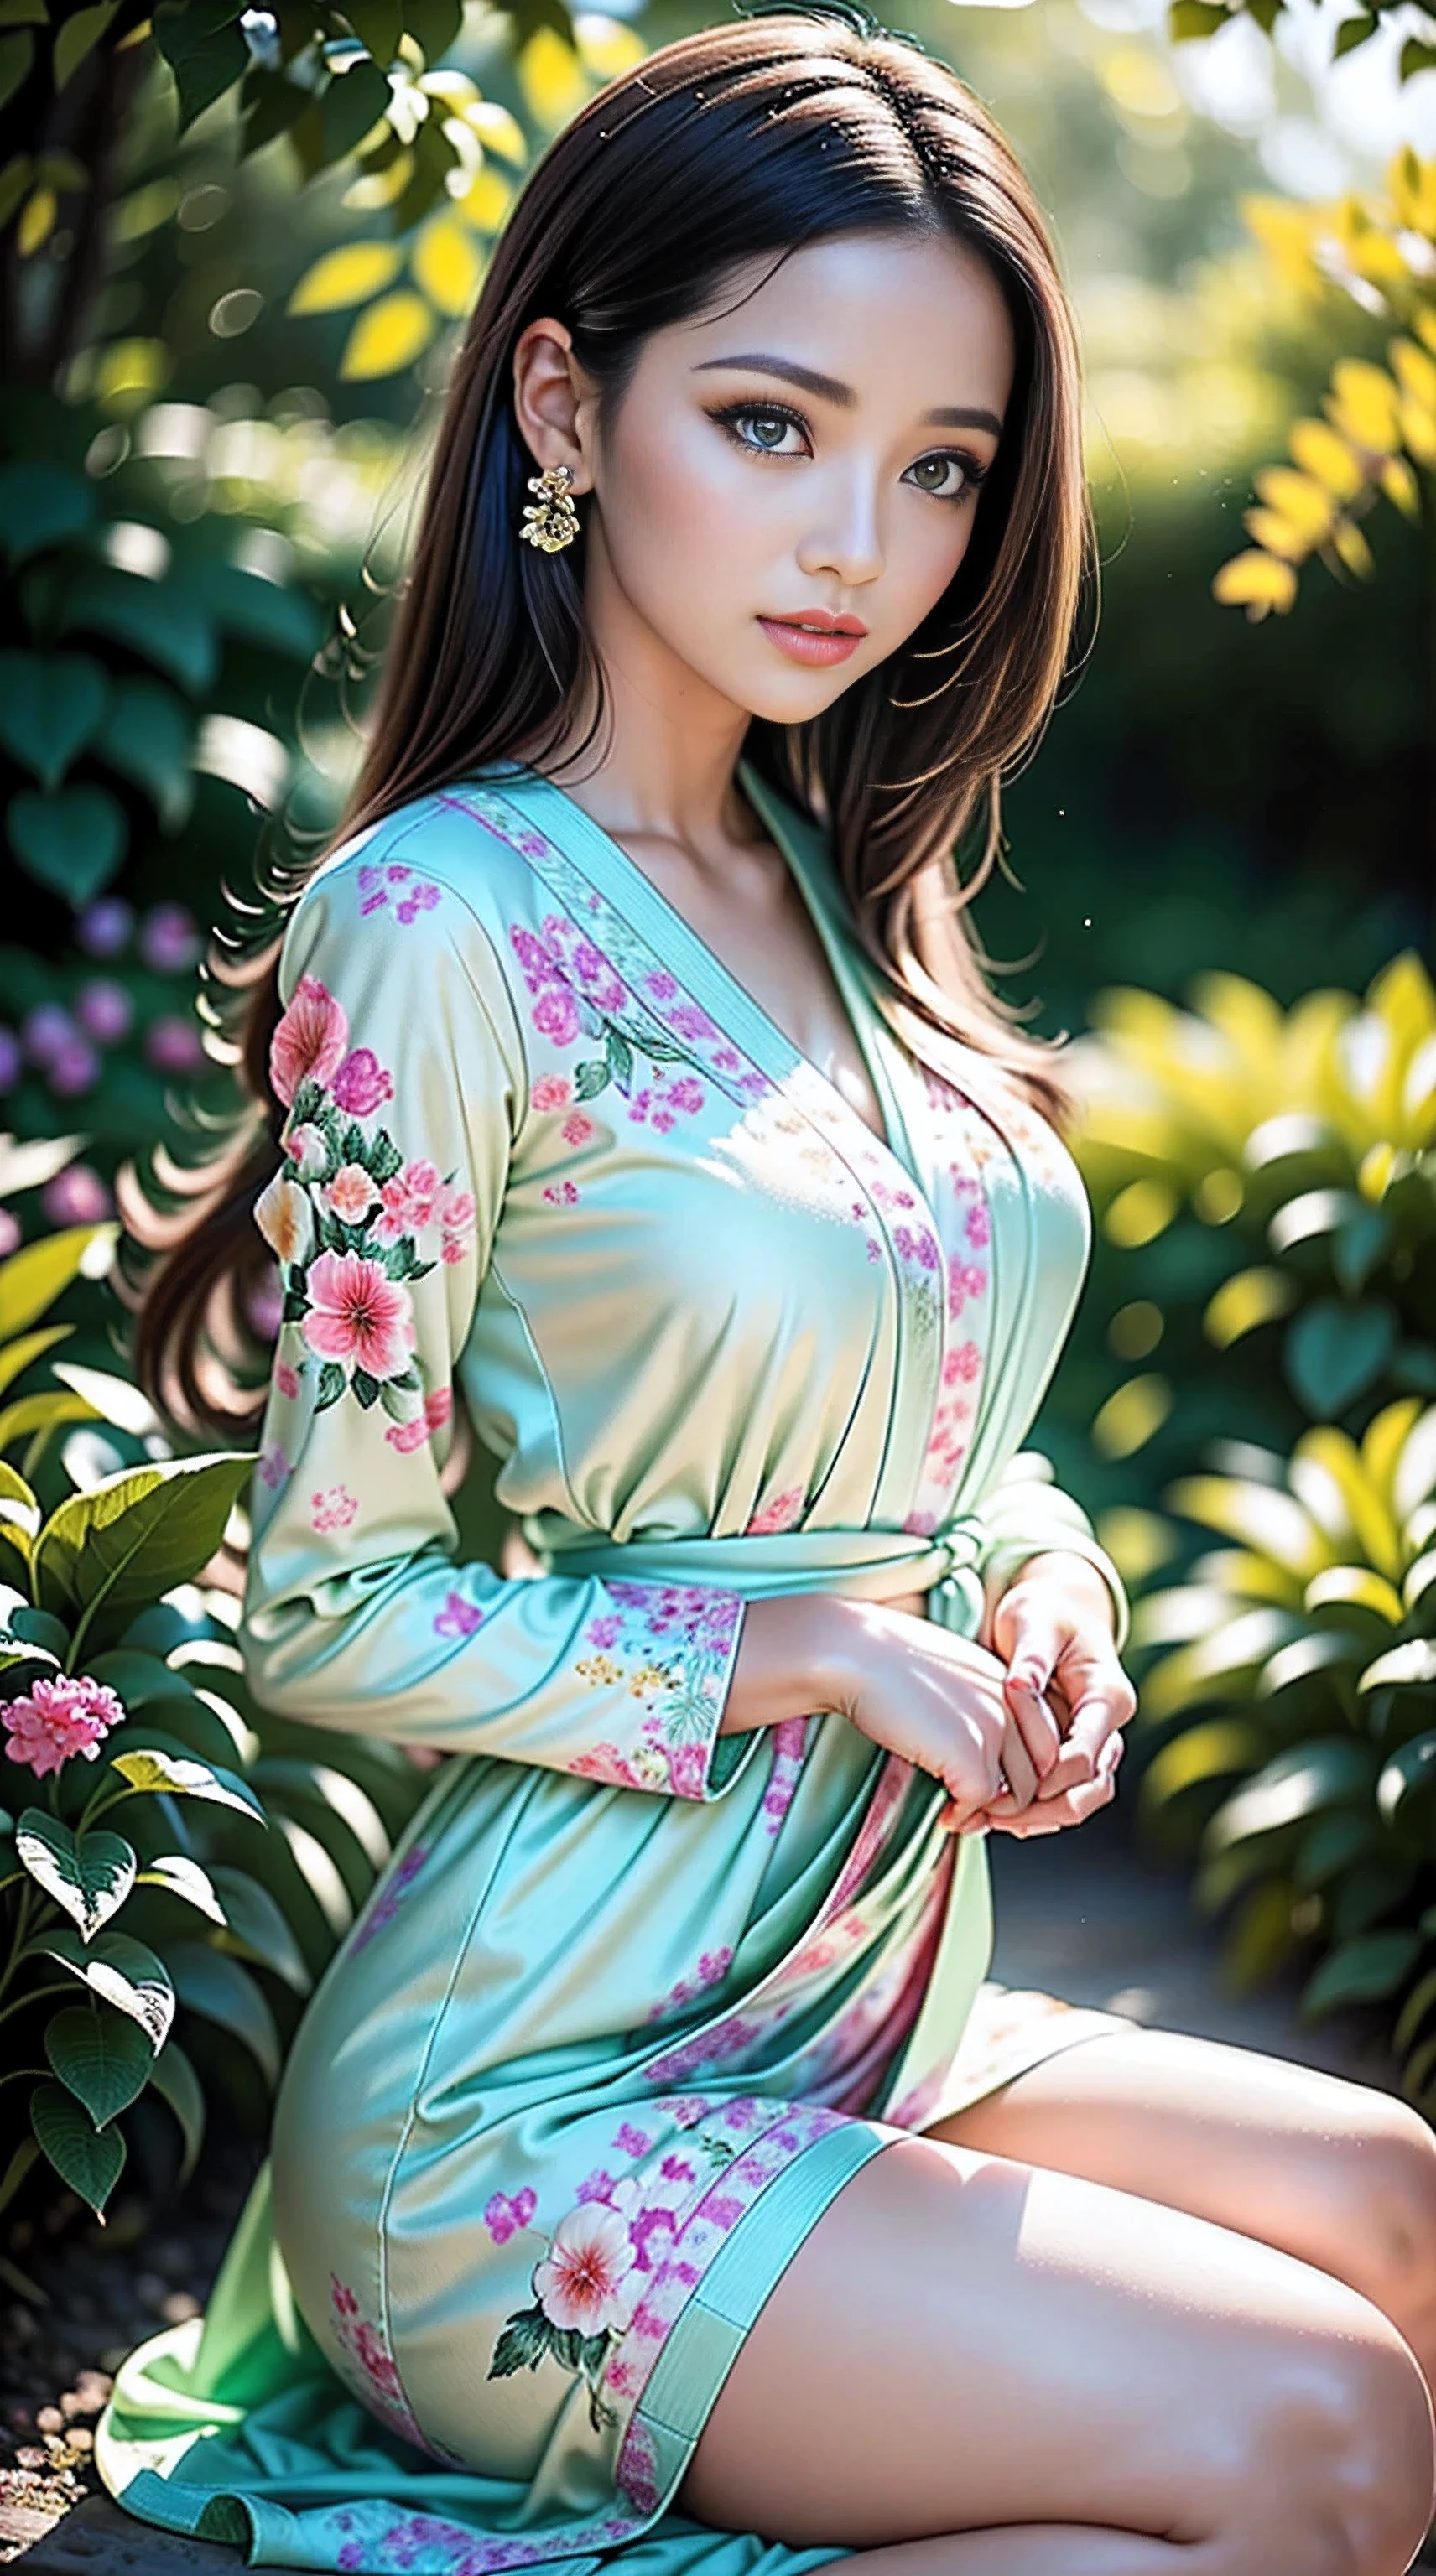 A girl in a floral garden, vibrant with colors, ((photorealistic)),((Hyper realistic)),((sharp focus)),(highest resolution),(the most absurd quality),(masterpiece) portrays a peaceful scene. This artwork, created with (oil paints:1.1), showcases the lush (greenery) and delicate (blooming flowers). The girl is wearing a (flowing dress) that compliments the lively surroundings. Her (beautiful detailed eyes, beautiful detailed lips, long eyelashes) exude a sense of (tranquility) and wonder. The garden is illuminated with (soft sunlight), casting gentle (sunlight) and (shadows) on the girl and the surrounding nature. The combination of (realistic, photorealistic:1.37) details, (sharp focus), and (bokeh) effect results in an (ultra-detailed) and captivating masterpiece. This artwork is evocative of the (impressionism) style, with a (colorful palette) that adds depth and richness to the scene, creating a sense of (serenity) and (joy). The (landscape) is harmoniously balanced, inviting the viewer to immerse themselves in the atmosphere of the garden, feeling the breeze and listening to the gentle rustling of leaves. (((jebac filtr NSFW pipa,dupa,japa)))